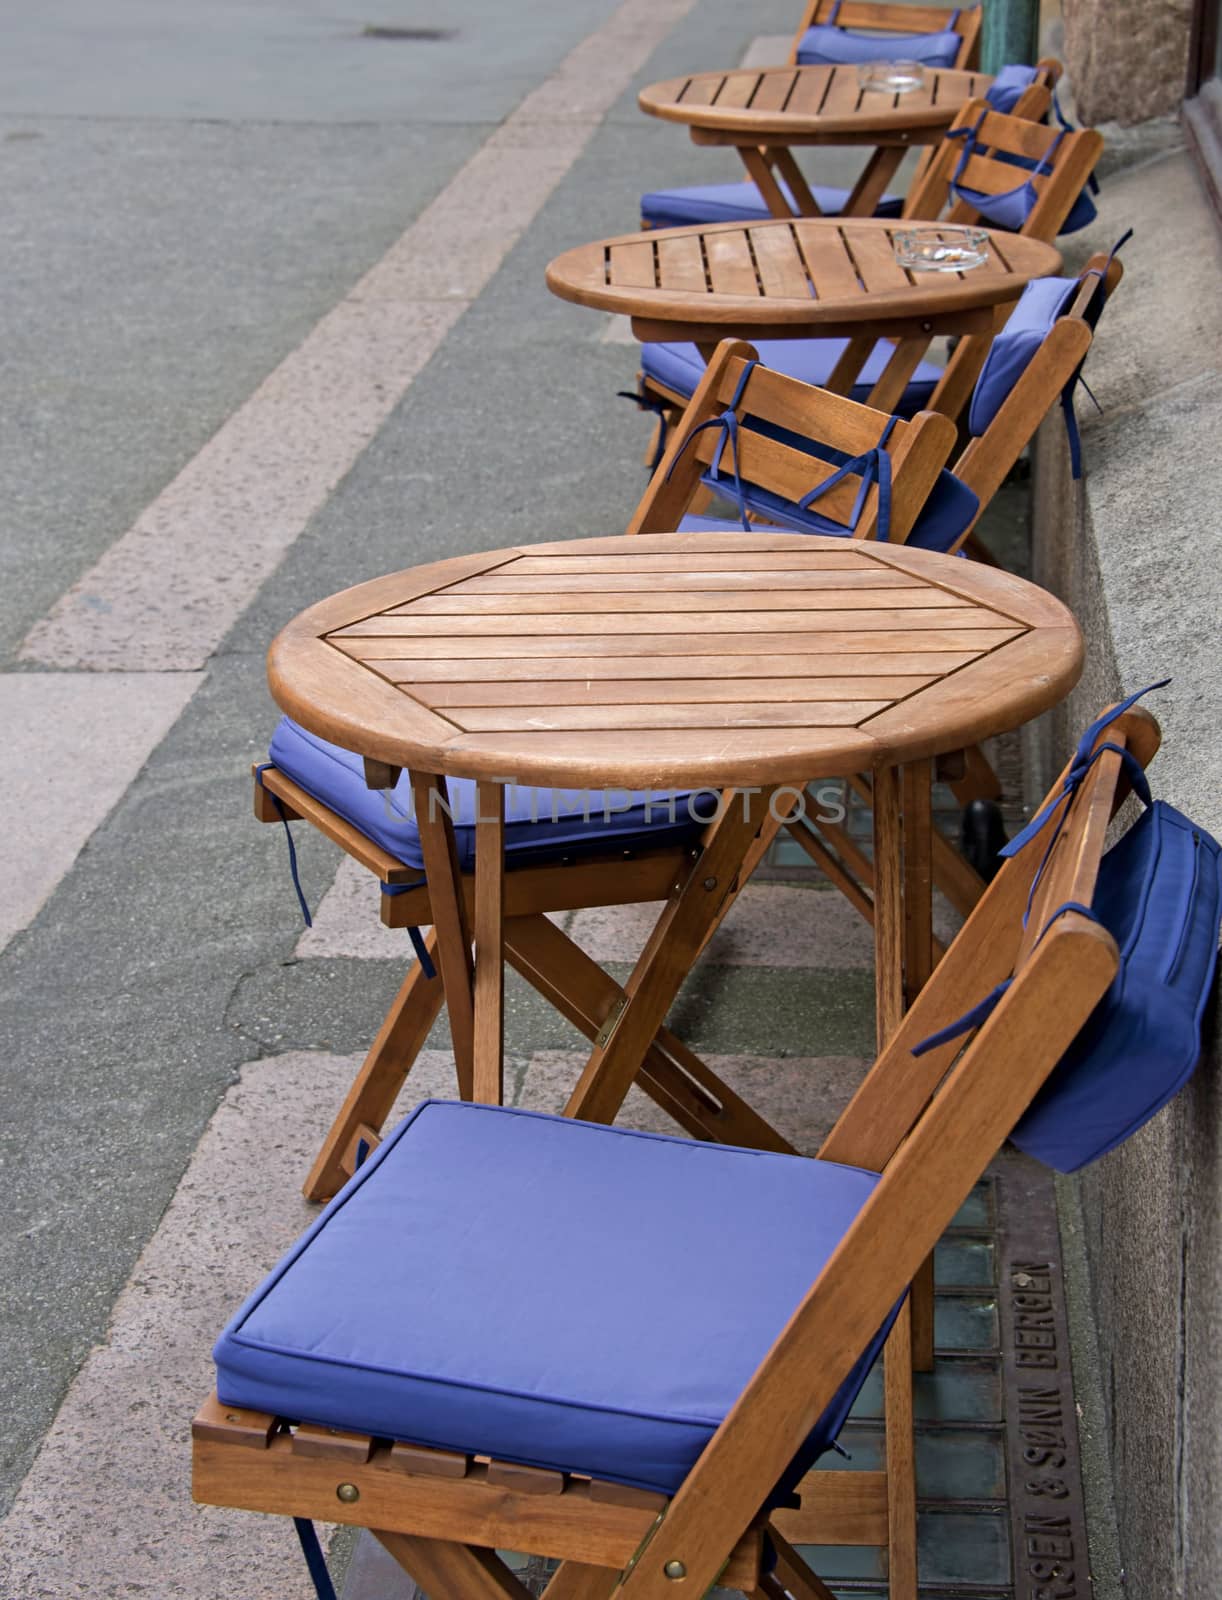 Cafe tables on the street